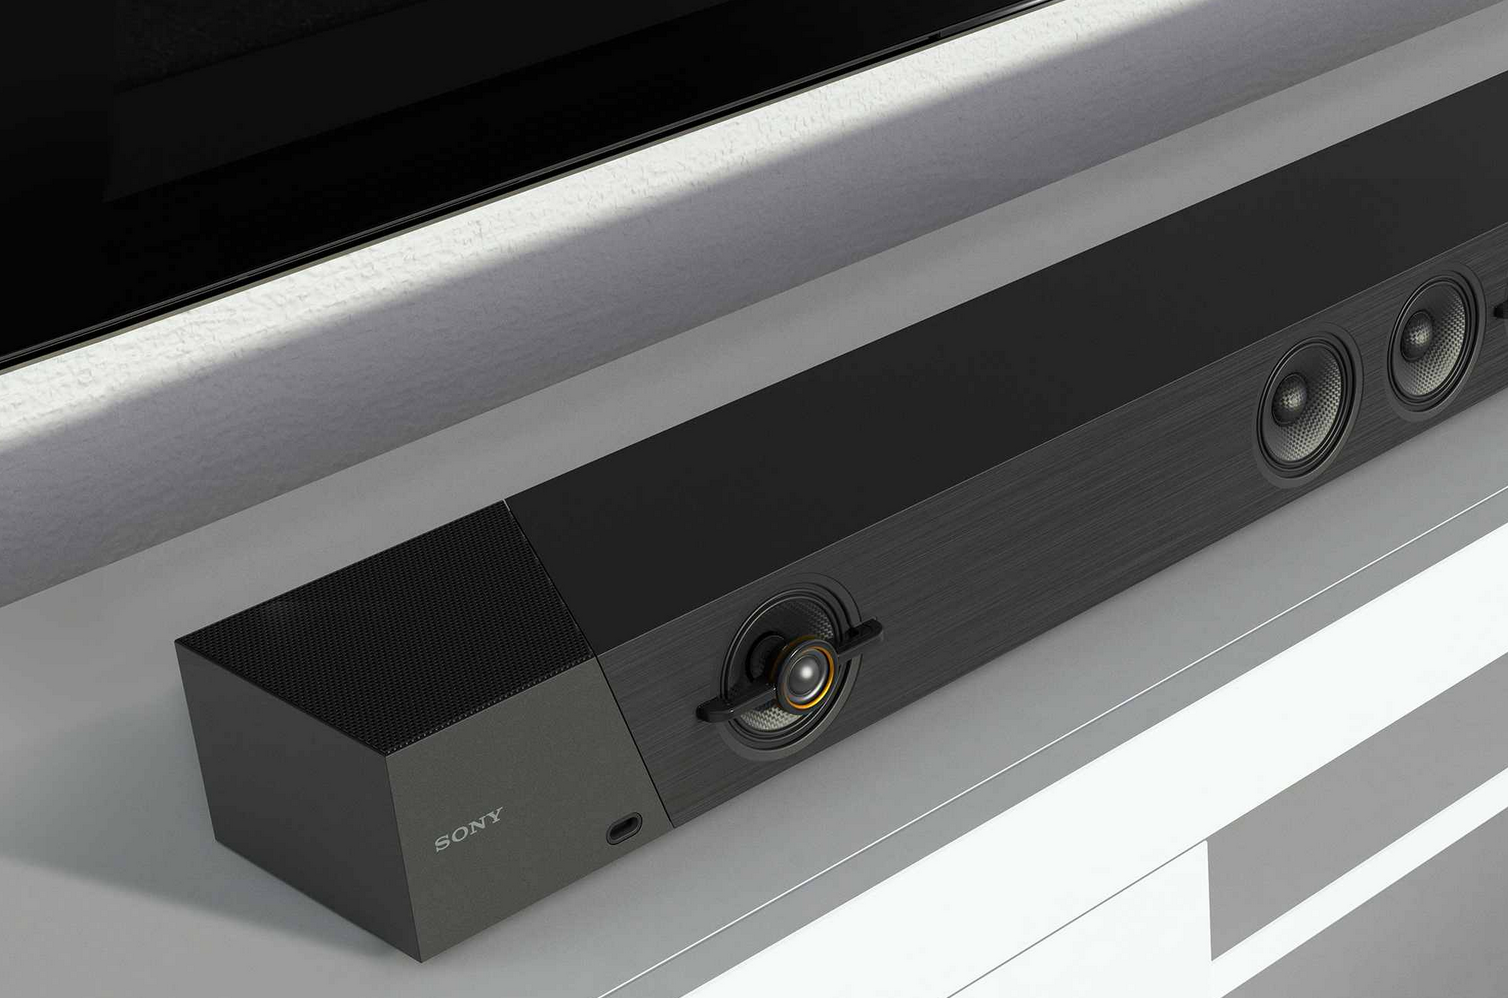 Sony HT-ST5000 sound bar and subwoofer review | Best Buy Blog